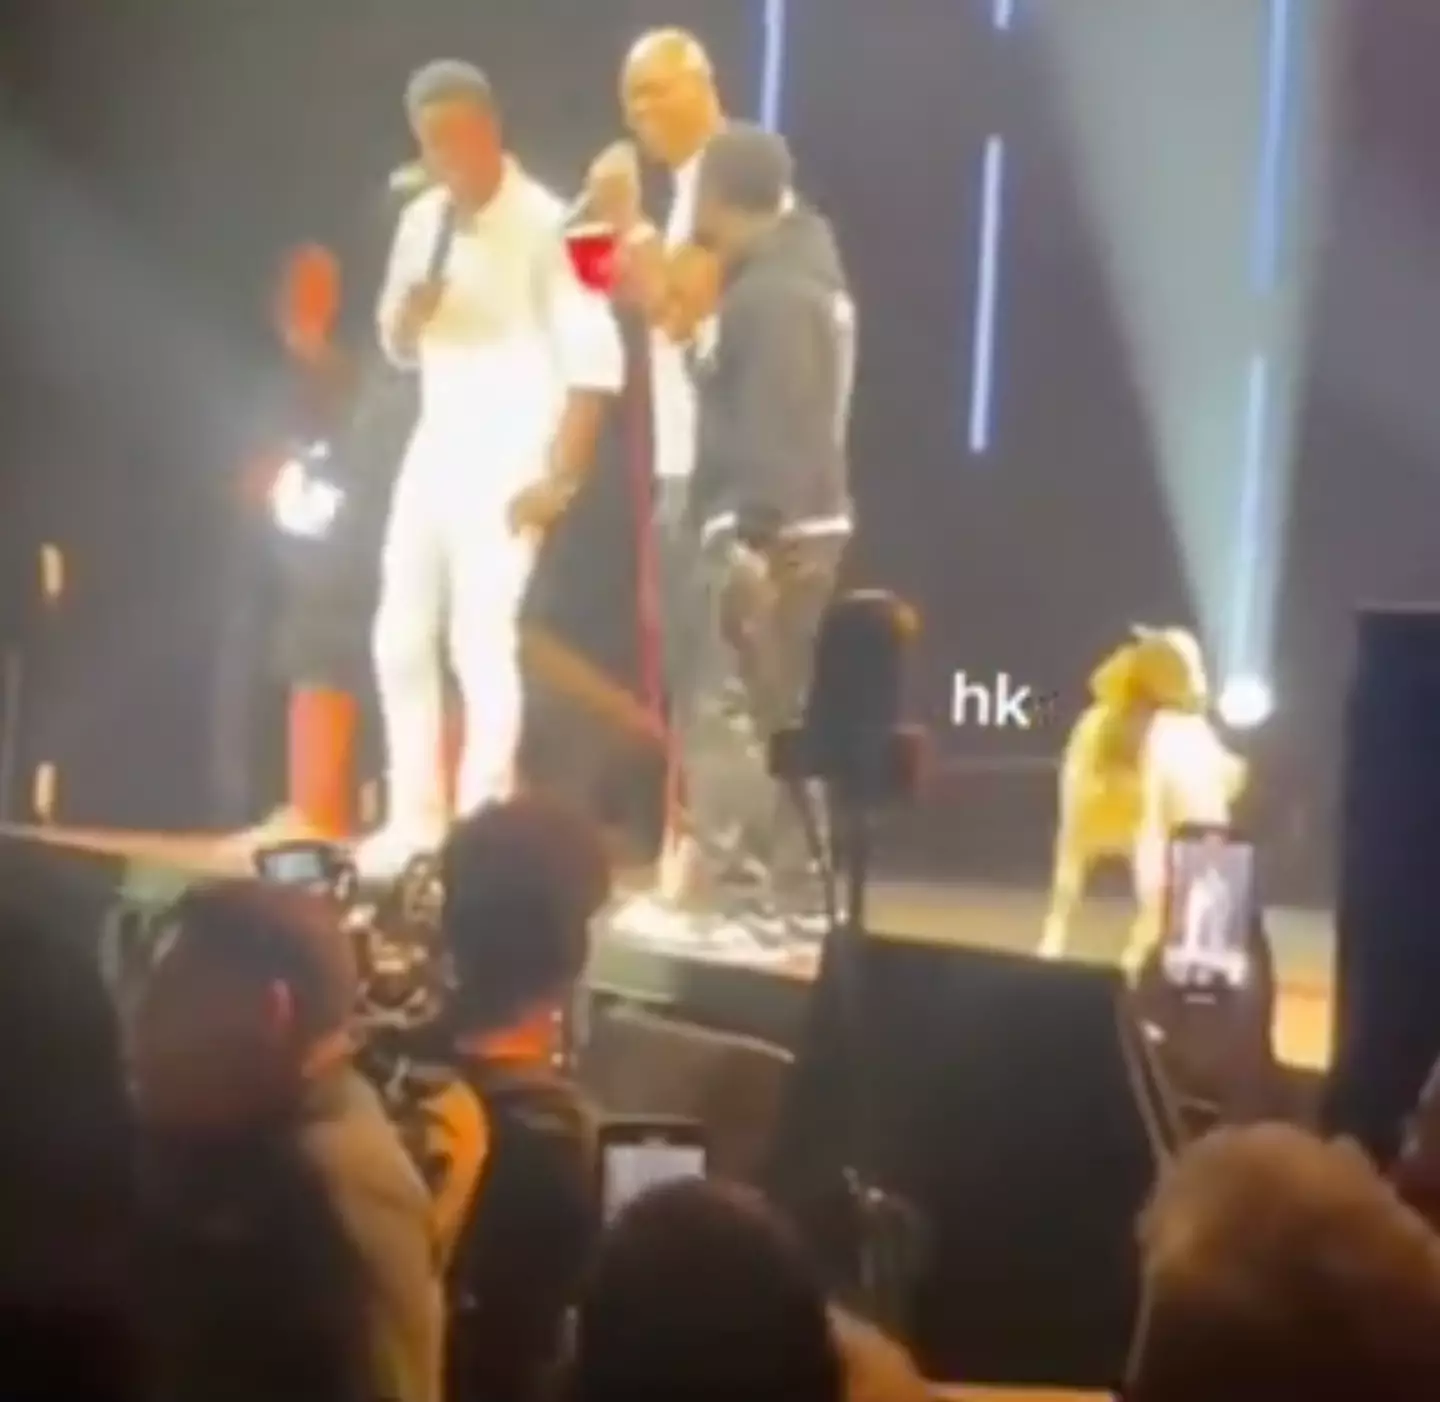 Chris Rock was surprised by Kevin Hart with a real, live goat on stage.